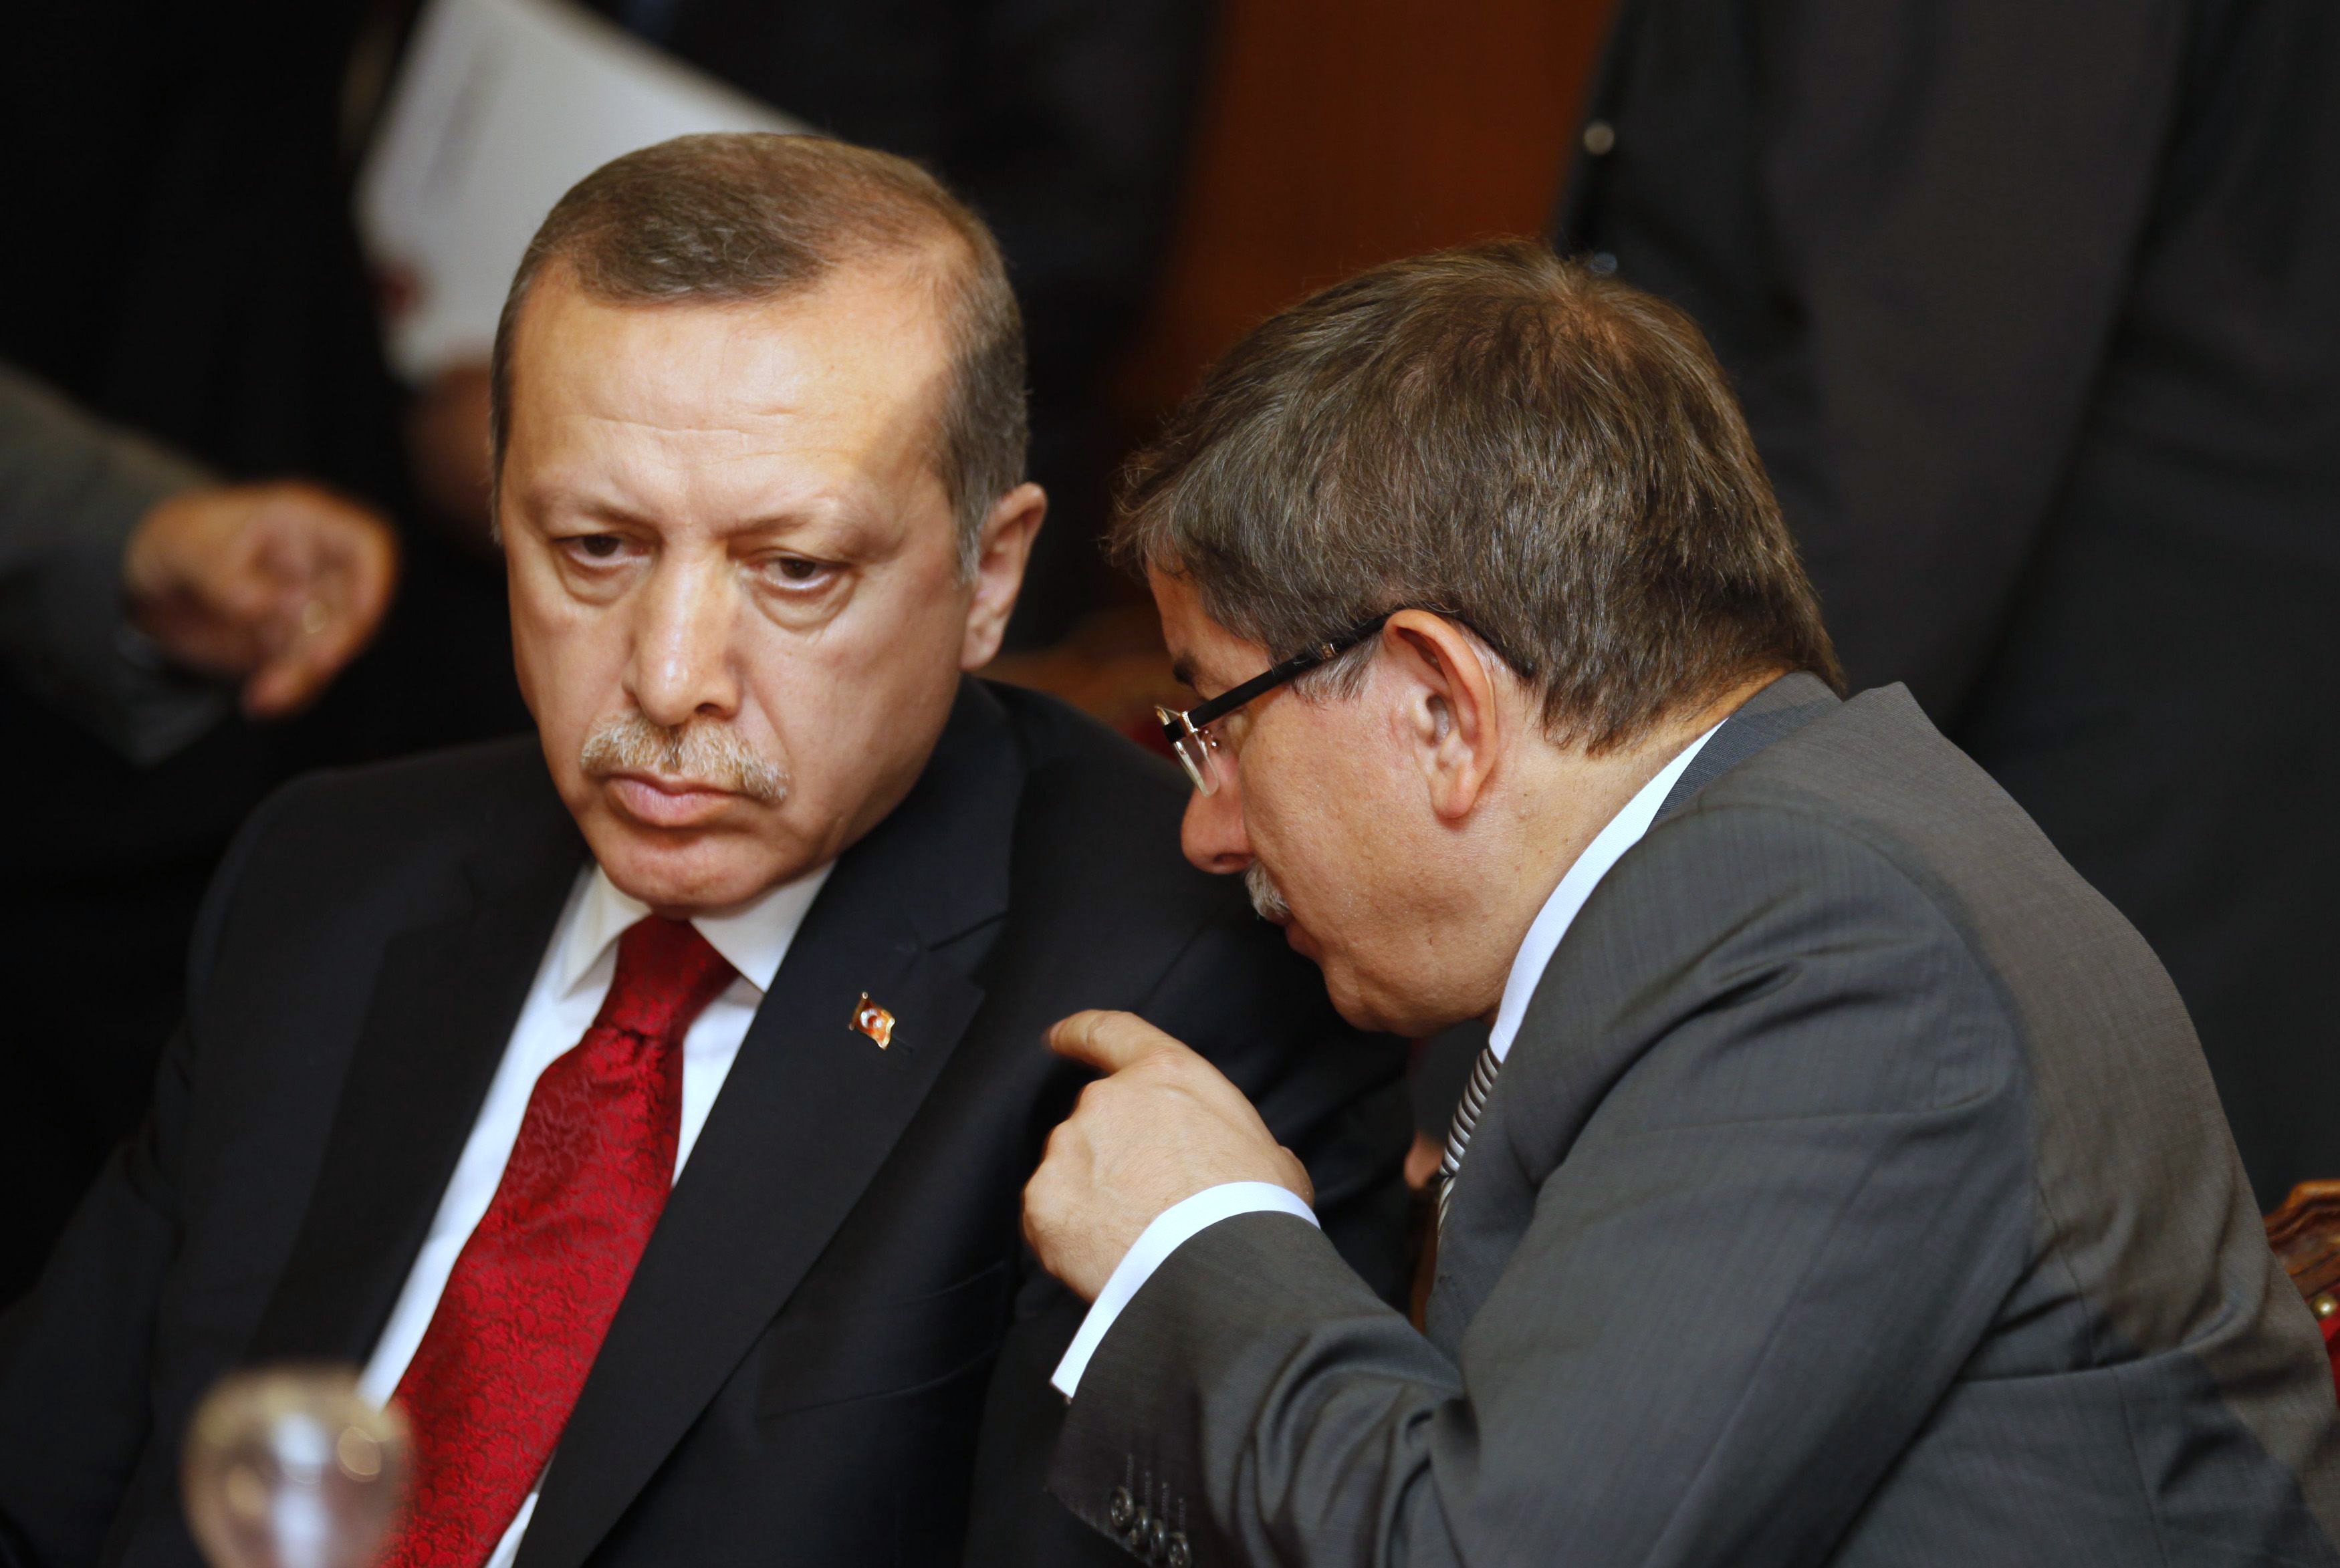 Turkey's FM Davutoglu speaks with Turkish PM Erdogan during a meeting at the government palace in Tunis